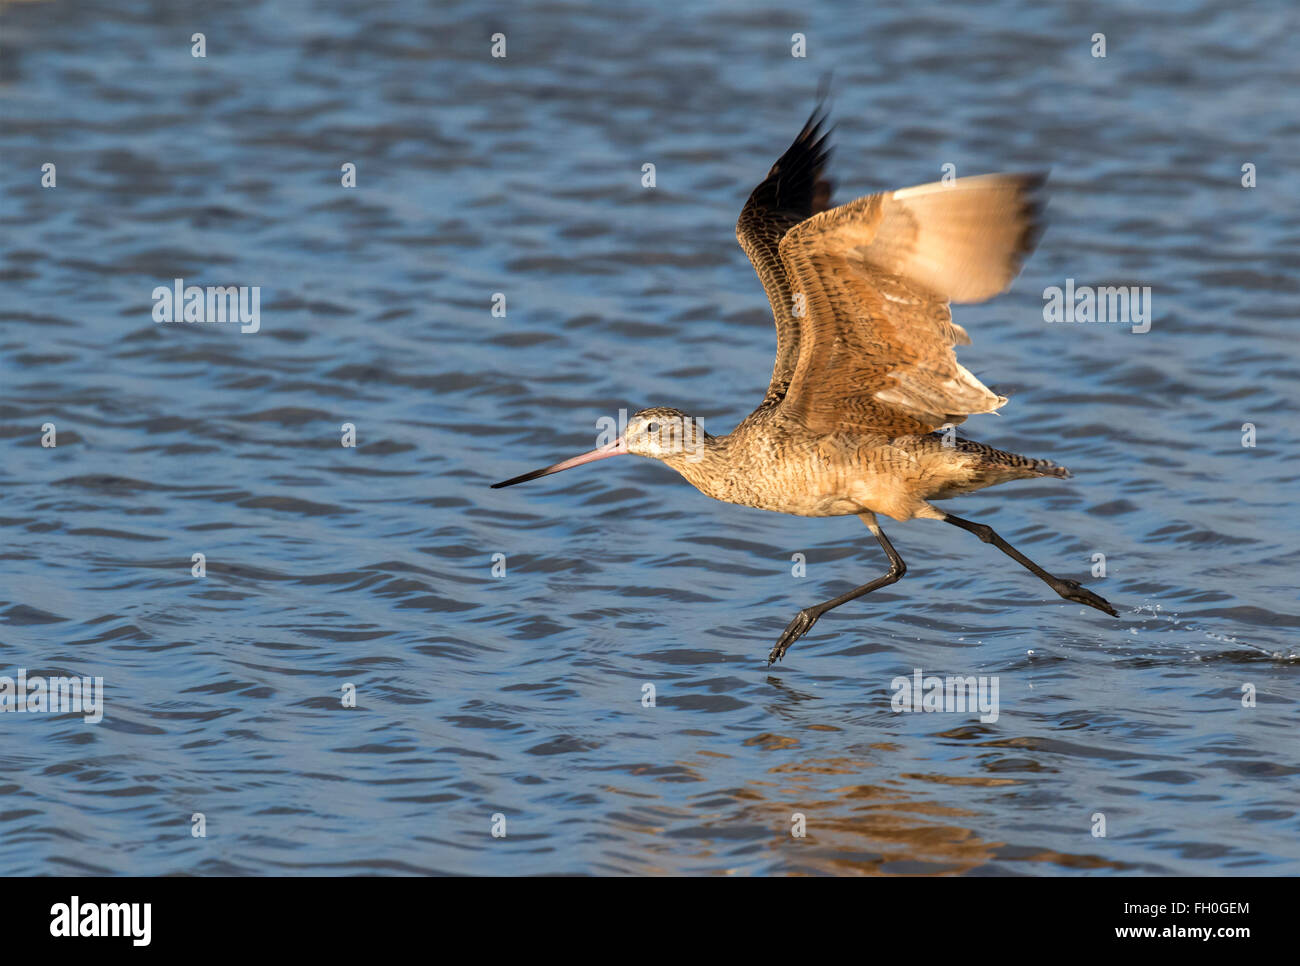 Marbled godwit (Limosa fedoa) taking off in shallow water near the ocean shore, Galveston, Texas, USA. Stock Photo